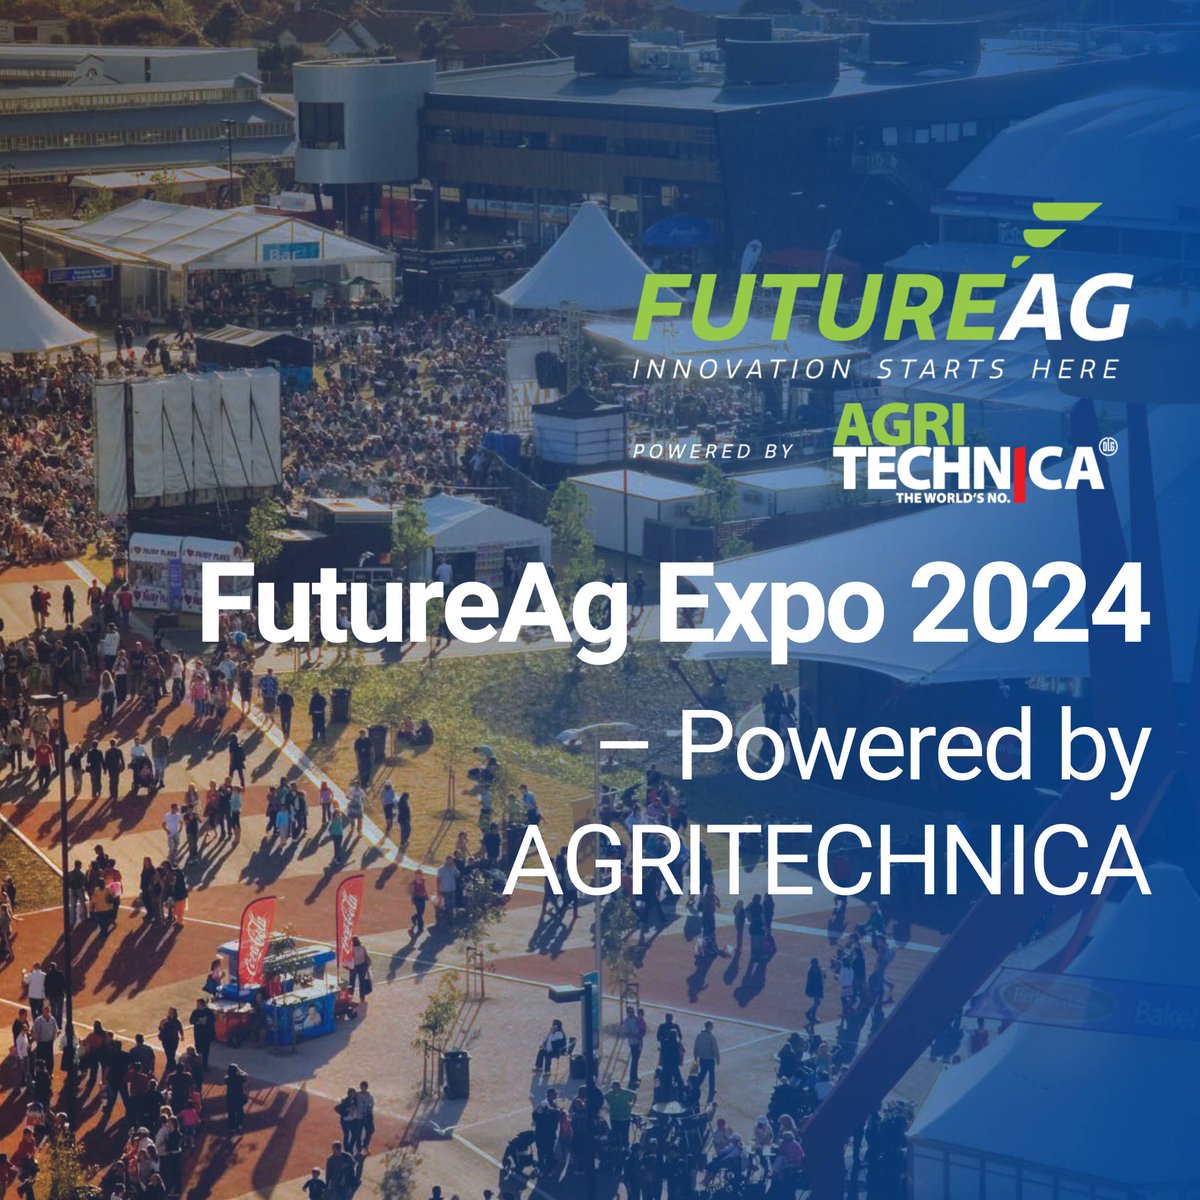 FutureAg Expo 2024 – Powered by #AGRITECHNICA: #DLG and Hannover Fairs Australia (#HFA), announced a strategic partnership to jointly organise a new Australia-based event, “FutureAg Expo 2024 – Powered by AGRITECHNICA”. Learn more: dlg.org/en/membership/…